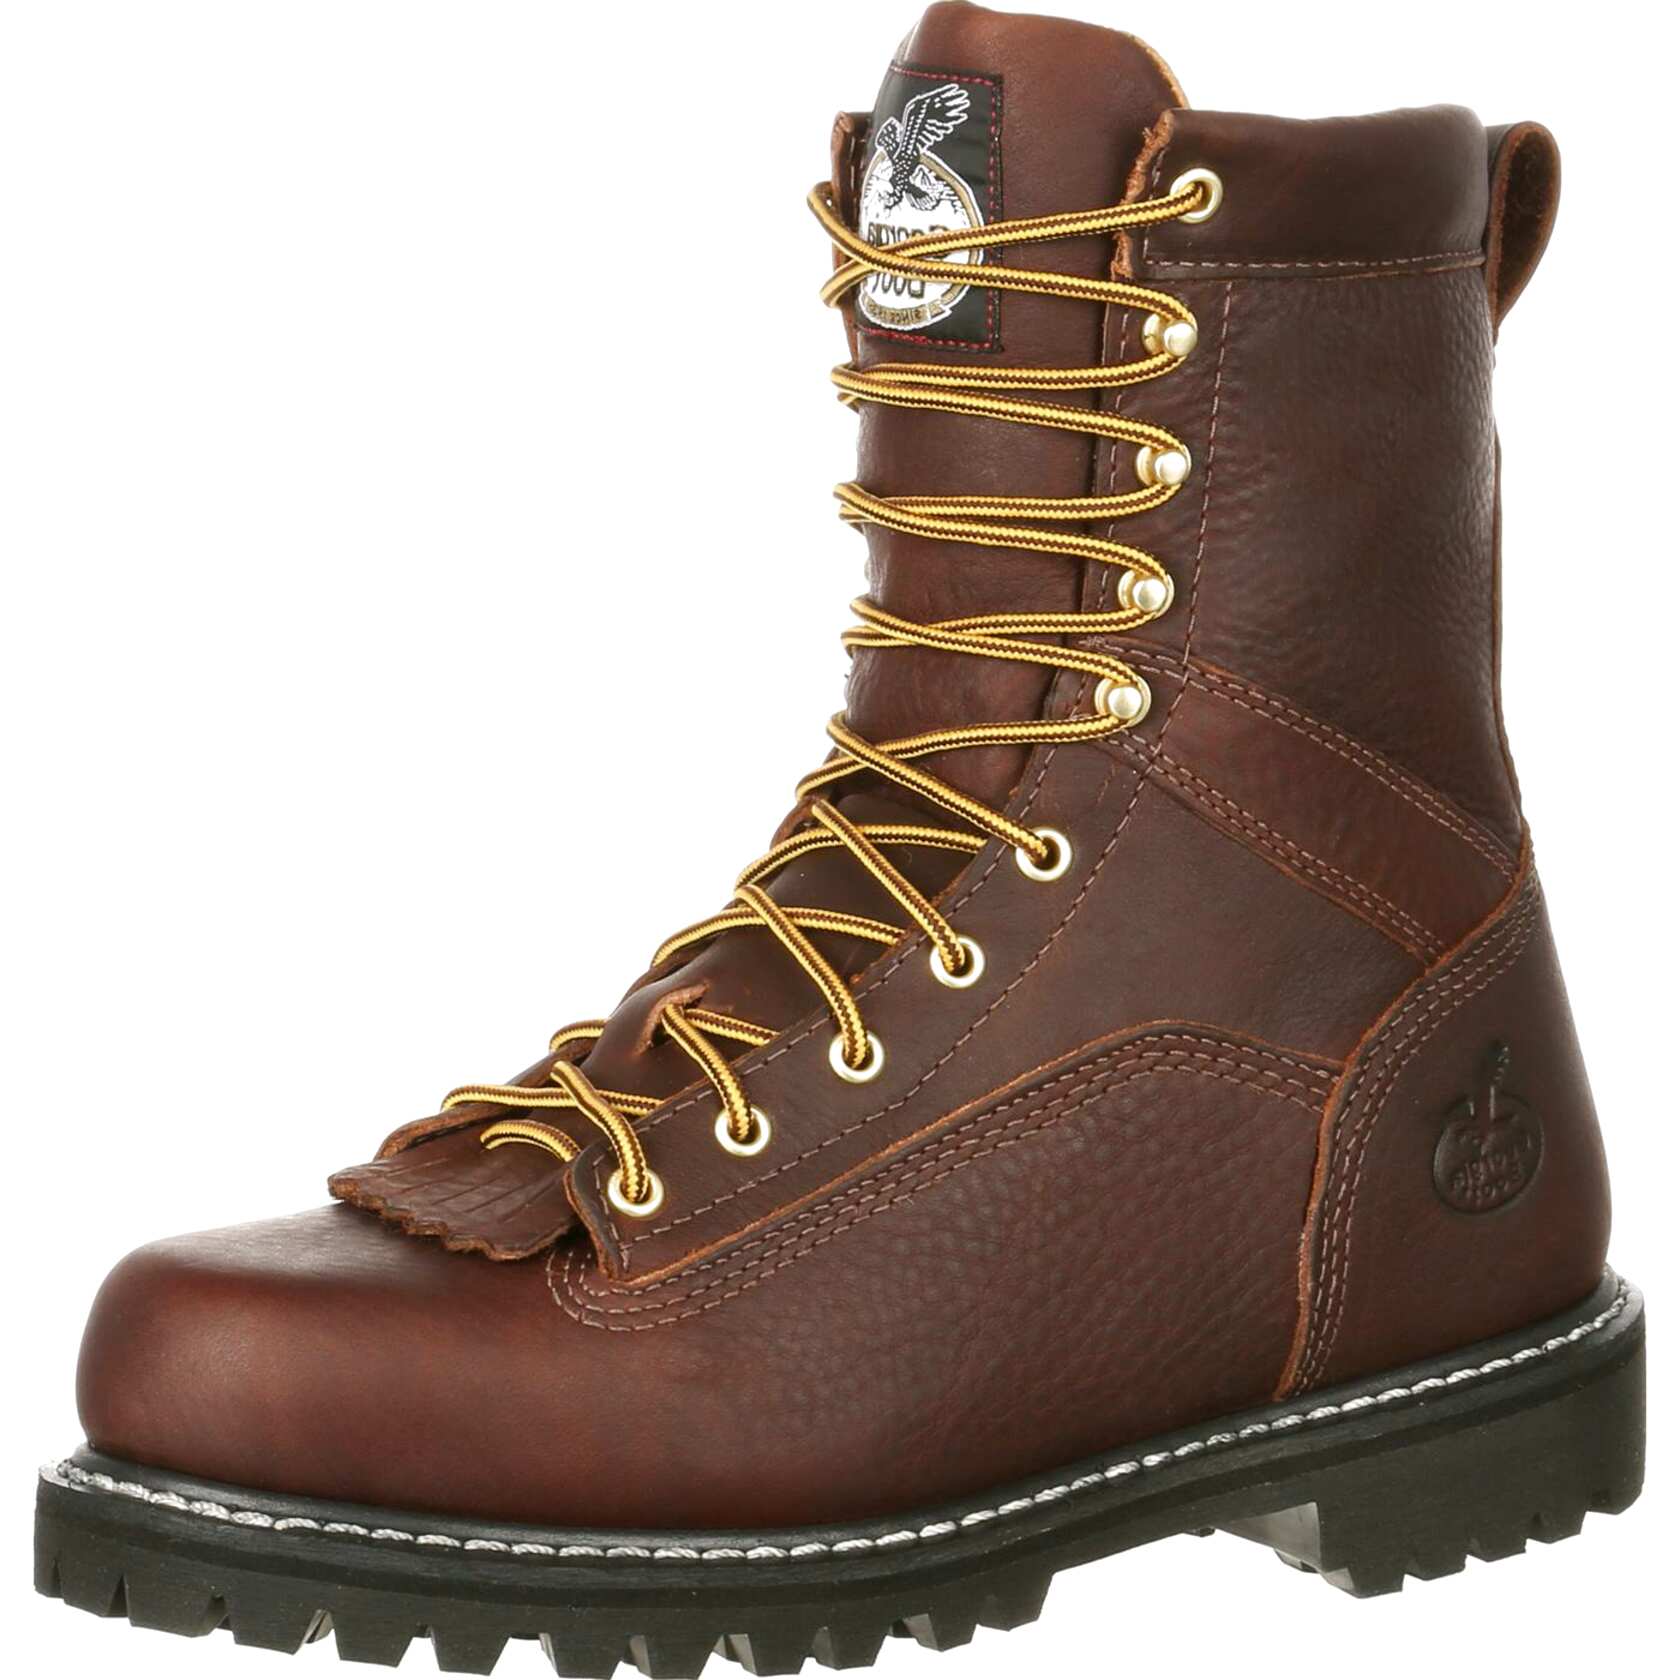 Vibram Steel Toe Boots for sale in UK | 59 used Vibram Steel Toe Boots